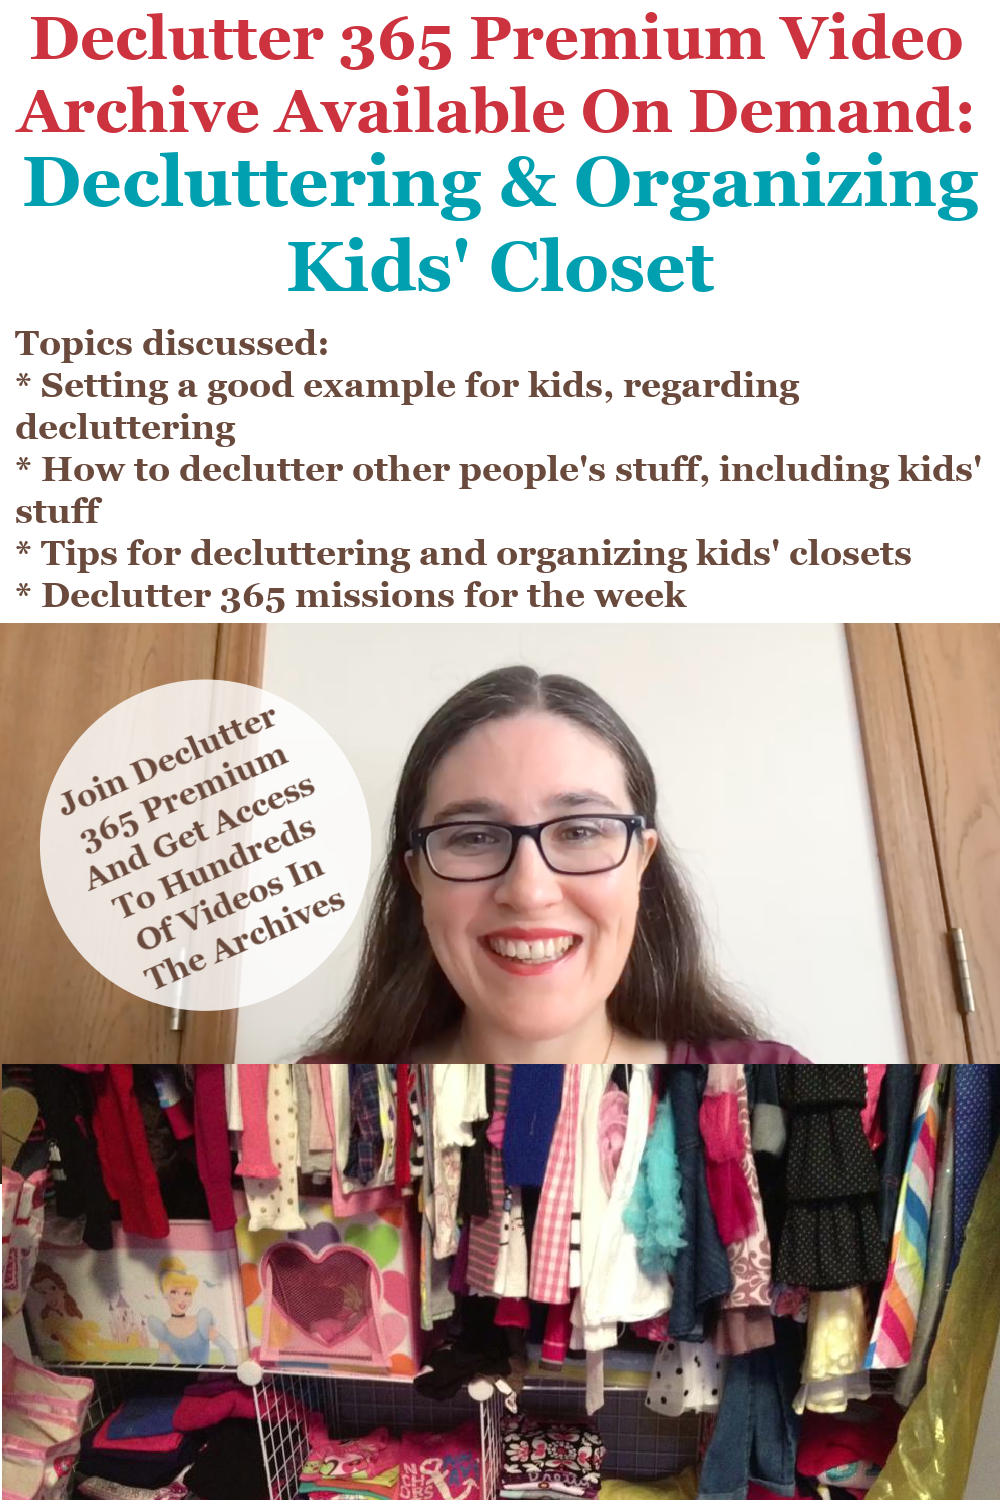 Declutter 365 Premium video archive available on demand all about decluttering and organizing kids' closets, on Home Storage Solutions 101